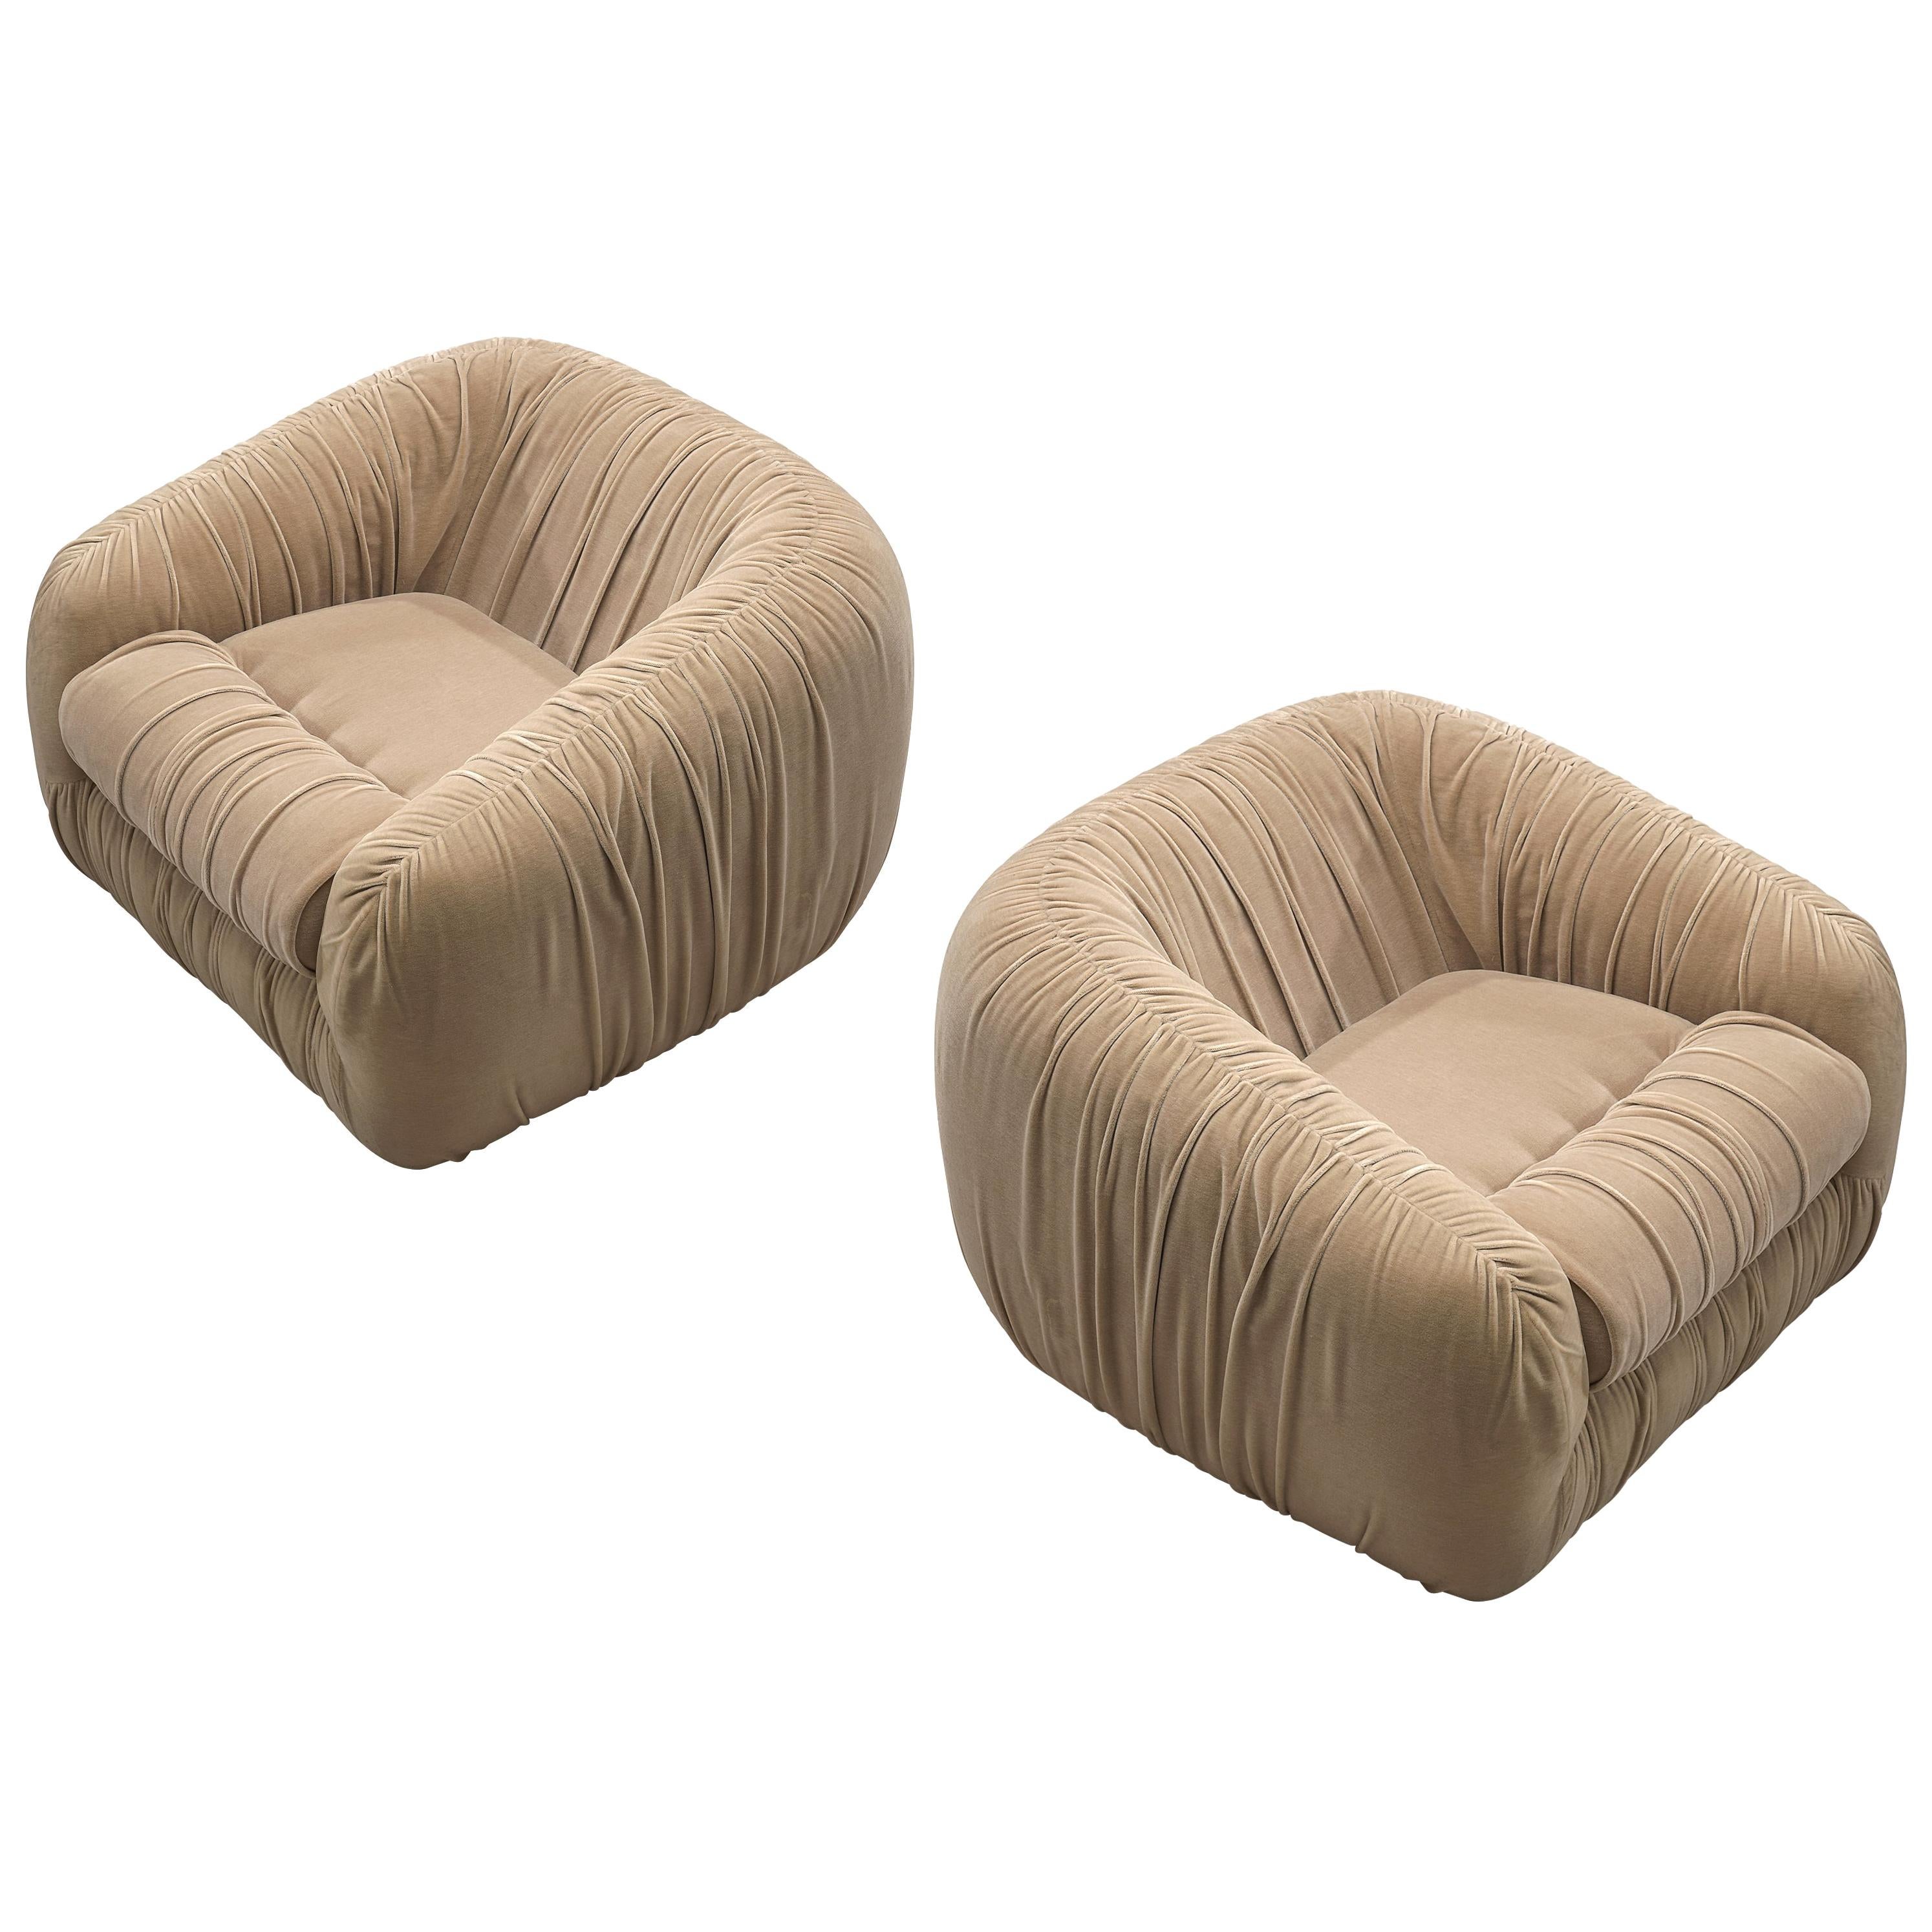 Pair of Easy Chairs in Beige Upholstery by Airborne